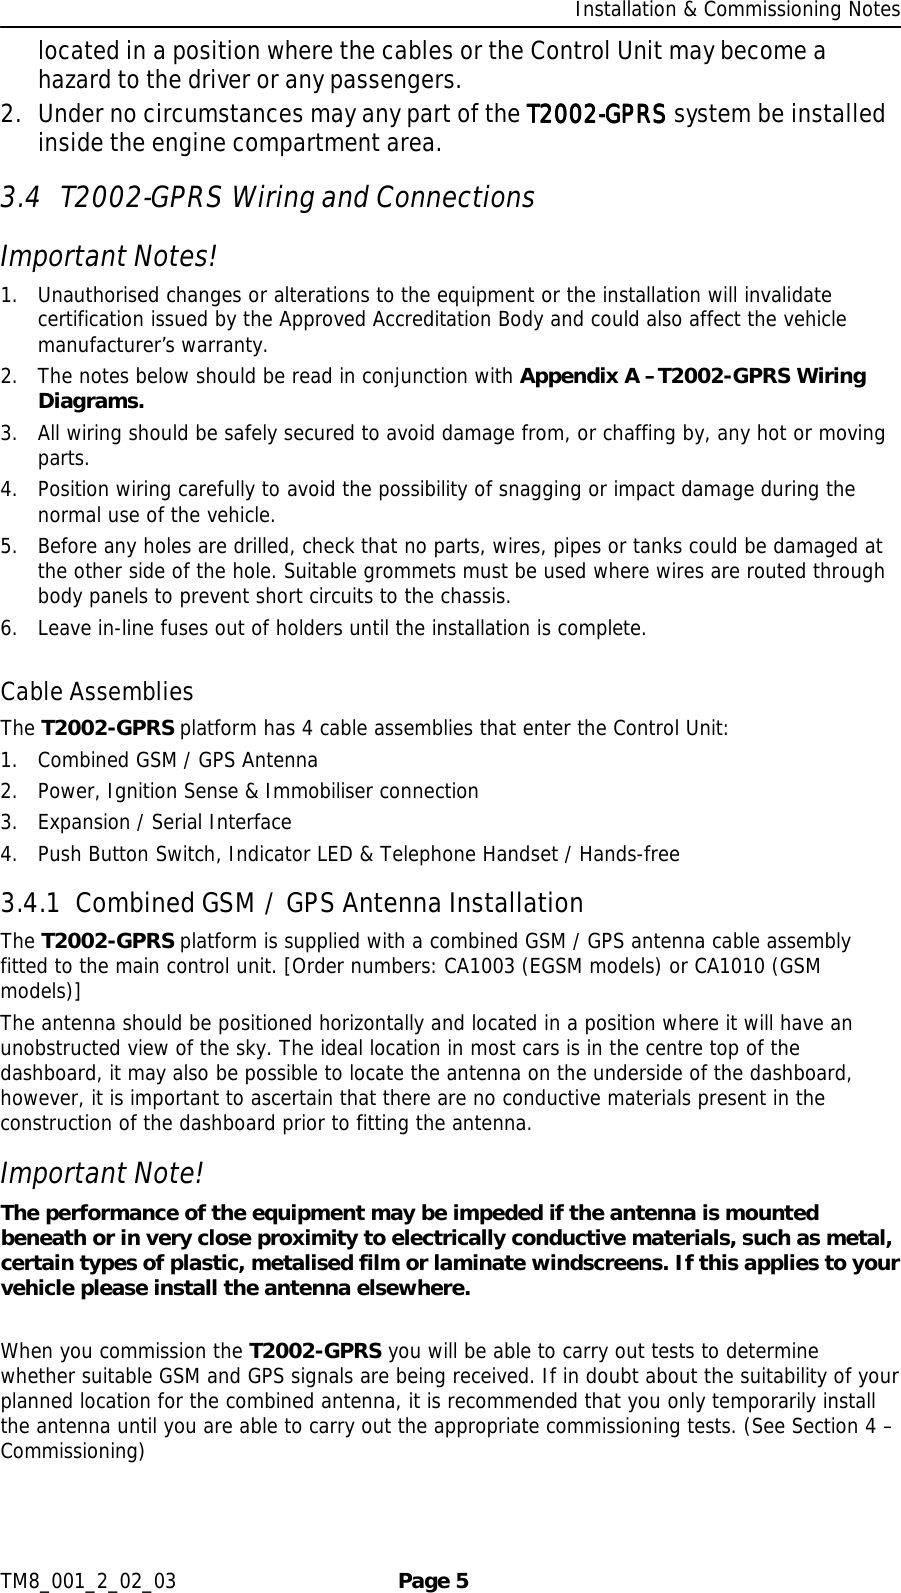     Installation &amp; Commissioning Notes TM8_001_2_02_03  Page 5 located in a position where the cables or the Control Unit may become a hazard to the driver or any passengers.  2. Under no circumstances may any part of the T2002T2002T2002T2002----GPRSGPRSGPRSGPRS system be installed inside the engine compartment area. 3.4 T2002-GPRS Wiring and Connections Important Notes! 1. Unauthorised changes or alterations to the equipment or the installation will invalidate certification issued by the Approved Accreditation Body and could also affect the vehicle manufacturer’s warranty. 2. The notes below should be read in conjunction with Appendix A –T2002-GPRS Wiring Diagrams. 3. All wiring should be safely secured to avoid damage from, or chaffing by, any hot or moving parts. 4. Position wiring carefully to avoid the possibility of snagging or impact damage during the normal use of the vehicle. 5. Before any holes are drilled, check that no parts, wires, pipes or tanks could be damaged at the other side of the hole. Suitable grommets must be used where wires are routed through body panels to prevent short circuits to the chassis. 6. Leave in-line fuses out of holders until the installation is complete.  Cable Assemblies The T2002-GPRS platform has 4 cable assemblies that enter the Control Unit: 1. Combined GSM / GPS Antenna 2. Power, Ignition Sense &amp; Immobiliser connection 3. Expansion / Serial Interface 4. Push Button Switch, Indicator LED &amp; Telephone Handset / Hands-free 3.4.1 Combined GSM / GPS Antenna Installation The T2002-GPRS platform is supplied with a combined GSM / GPS antenna cable assembly fitted to the main control unit. [Order numbers: CA1003 (EGSM models) or CA1010 (GSM models)] The antenna should be positioned horizontally and located in a position where it will have an unobstructed view of the sky. The ideal location in most cars is in the centre top of the dashboard, it may also be possible to locate the antenna on the underside of the dashboard, however, it is important to ascertain that there are no conductive materials present in the construction of the dashboard prior to fitting the antenna. Important Note! The performance of the equipment may be impeded if the antenna is mounted beneath or in very close proximity to electrically conductive materials, such as metal, certain types of plastic, metalised film or laminate windscreens. If this applies to your vehicle please install the antenna elsewhere.  When you commission the T2002-GPRS you will be able to carry out tests to determine whether suitable GSM and GPS signals are being received. If in doubt about the suitability of your planned location for the combined antenna, it is recommended that you only temporarily install the antenna until you are able to carry out the appropriate commissioning tests. (See Section 4 – Commissioning)  